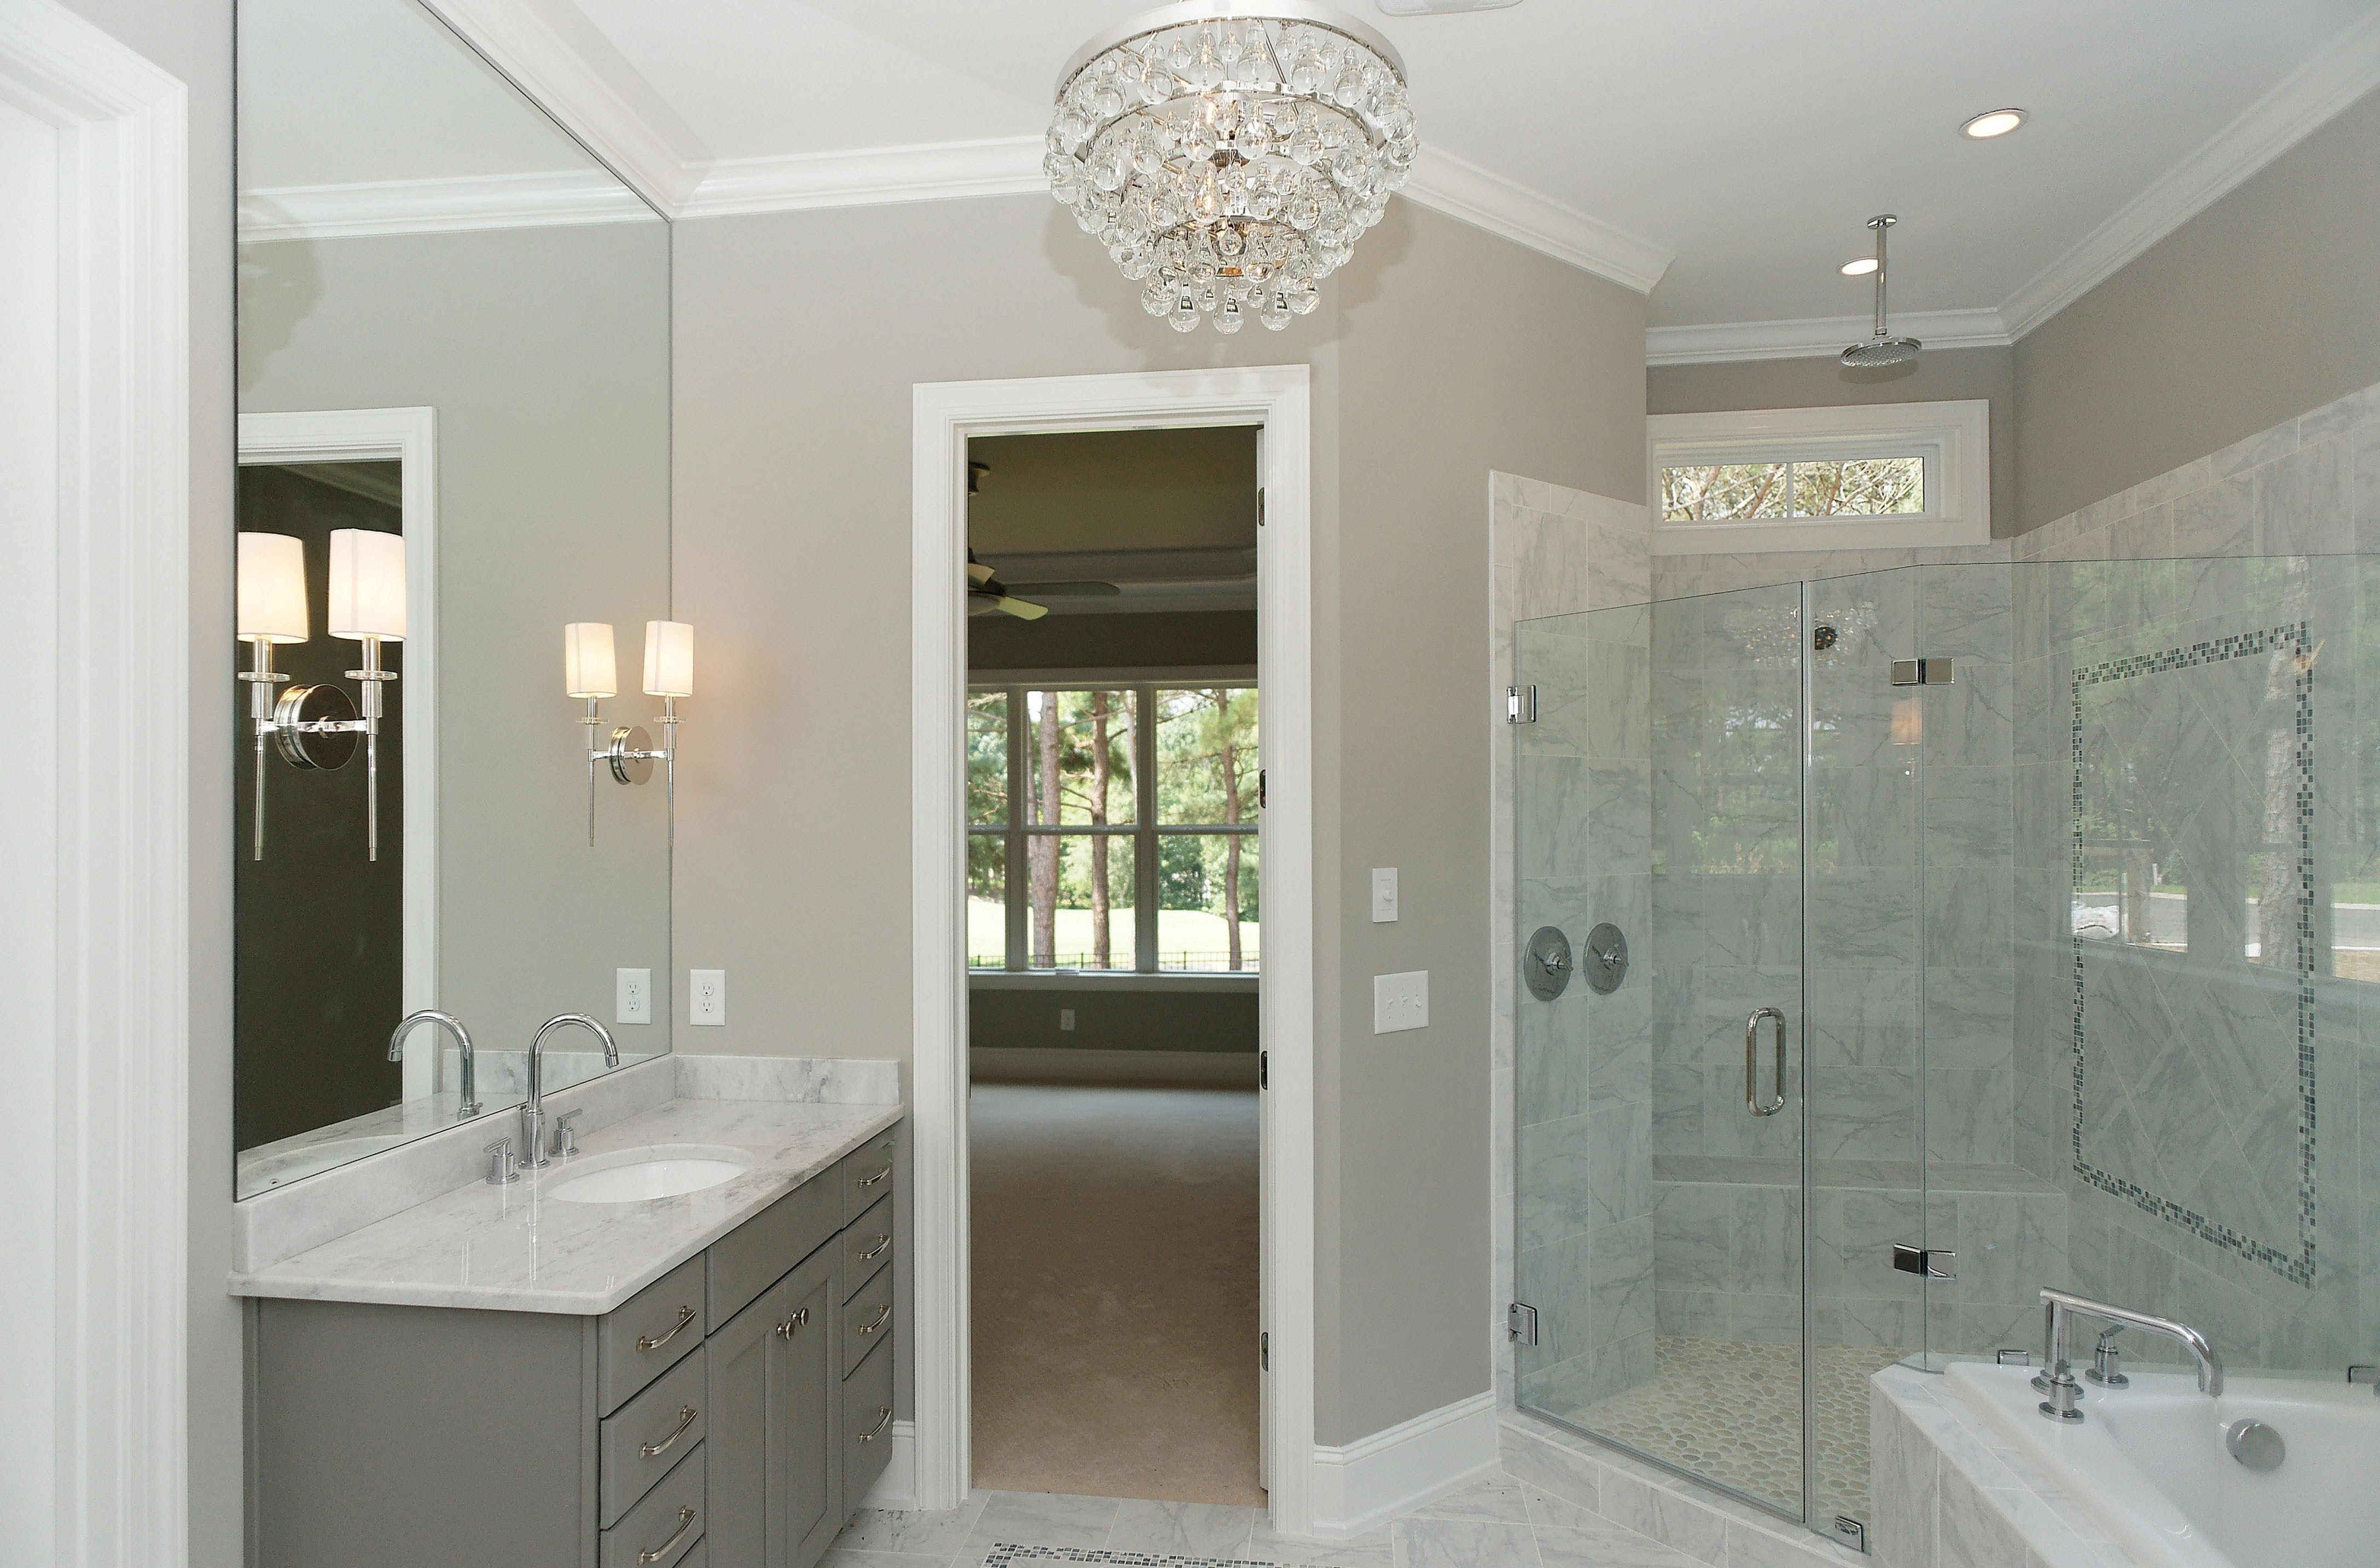 Photo of a gray bathroom for an article about farmhouse gray.